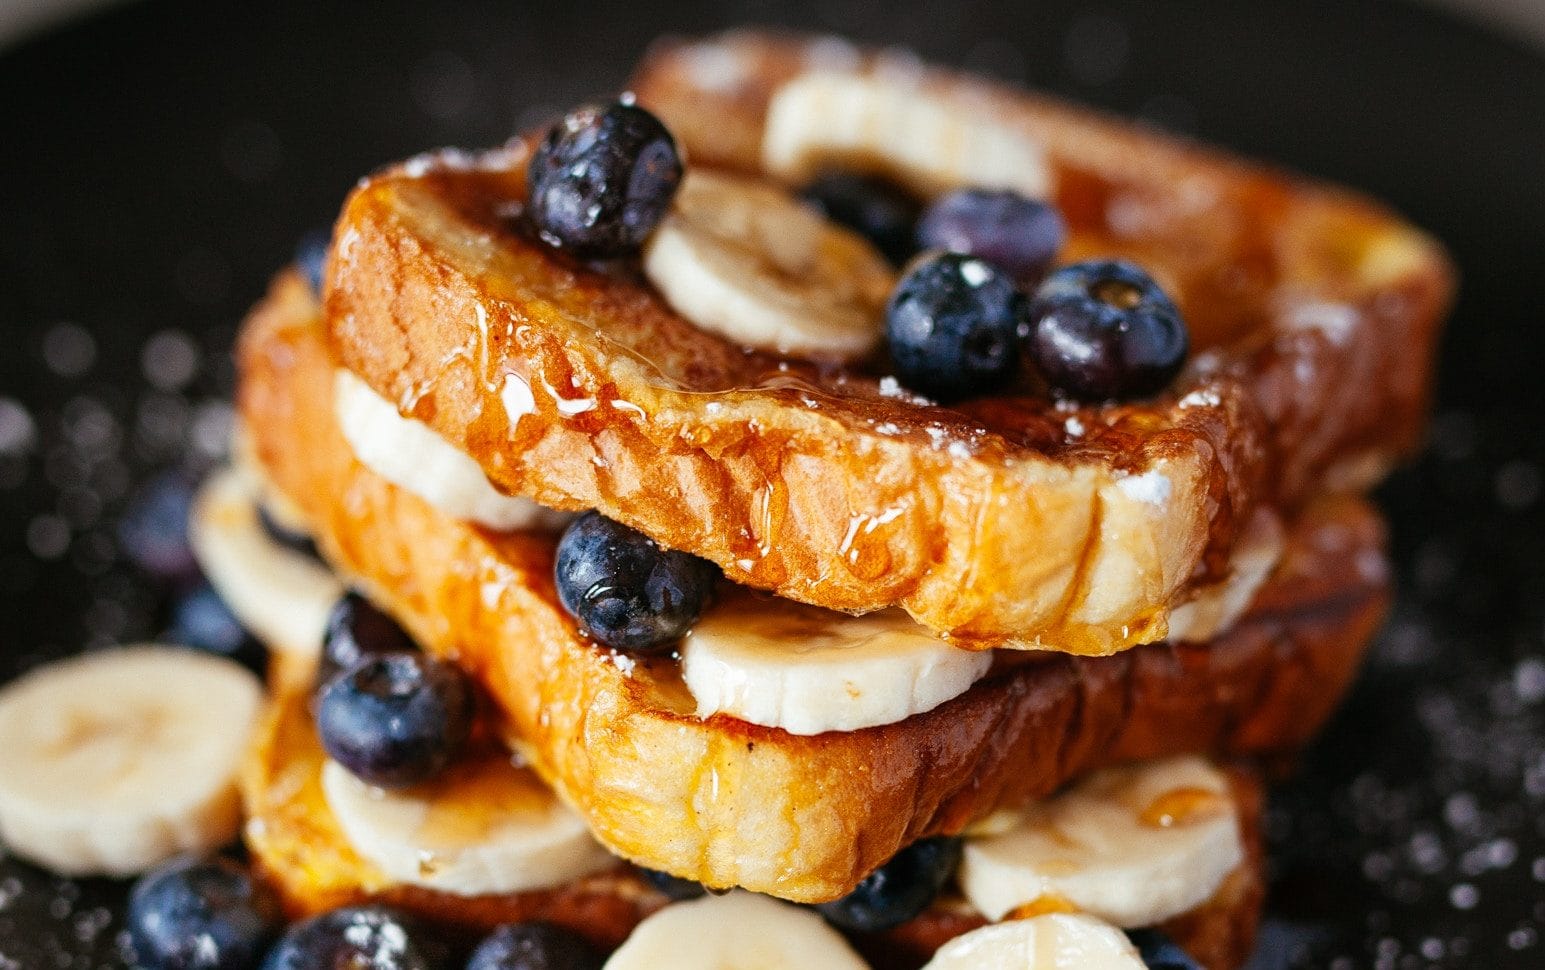 French Toast with bananas and blueberries